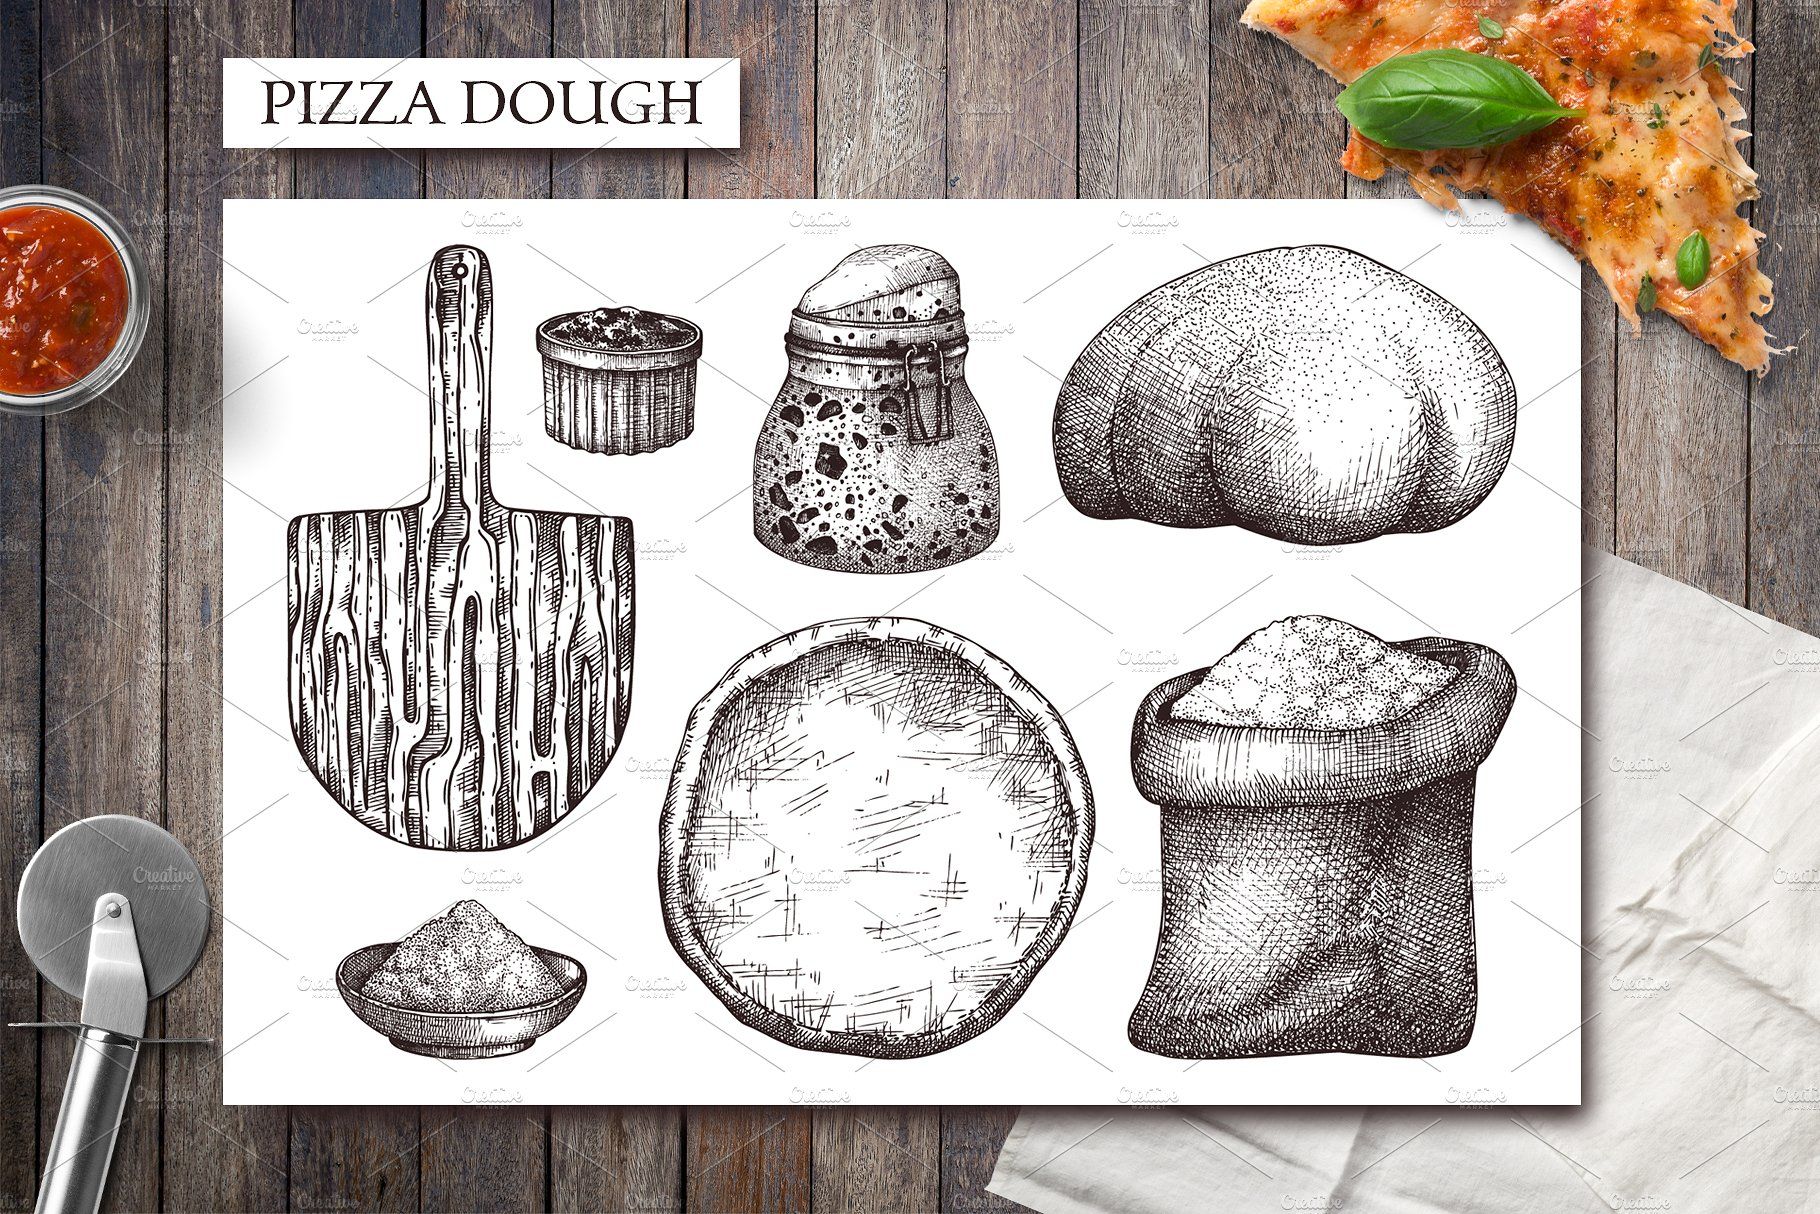 Pizza ingredients collection.